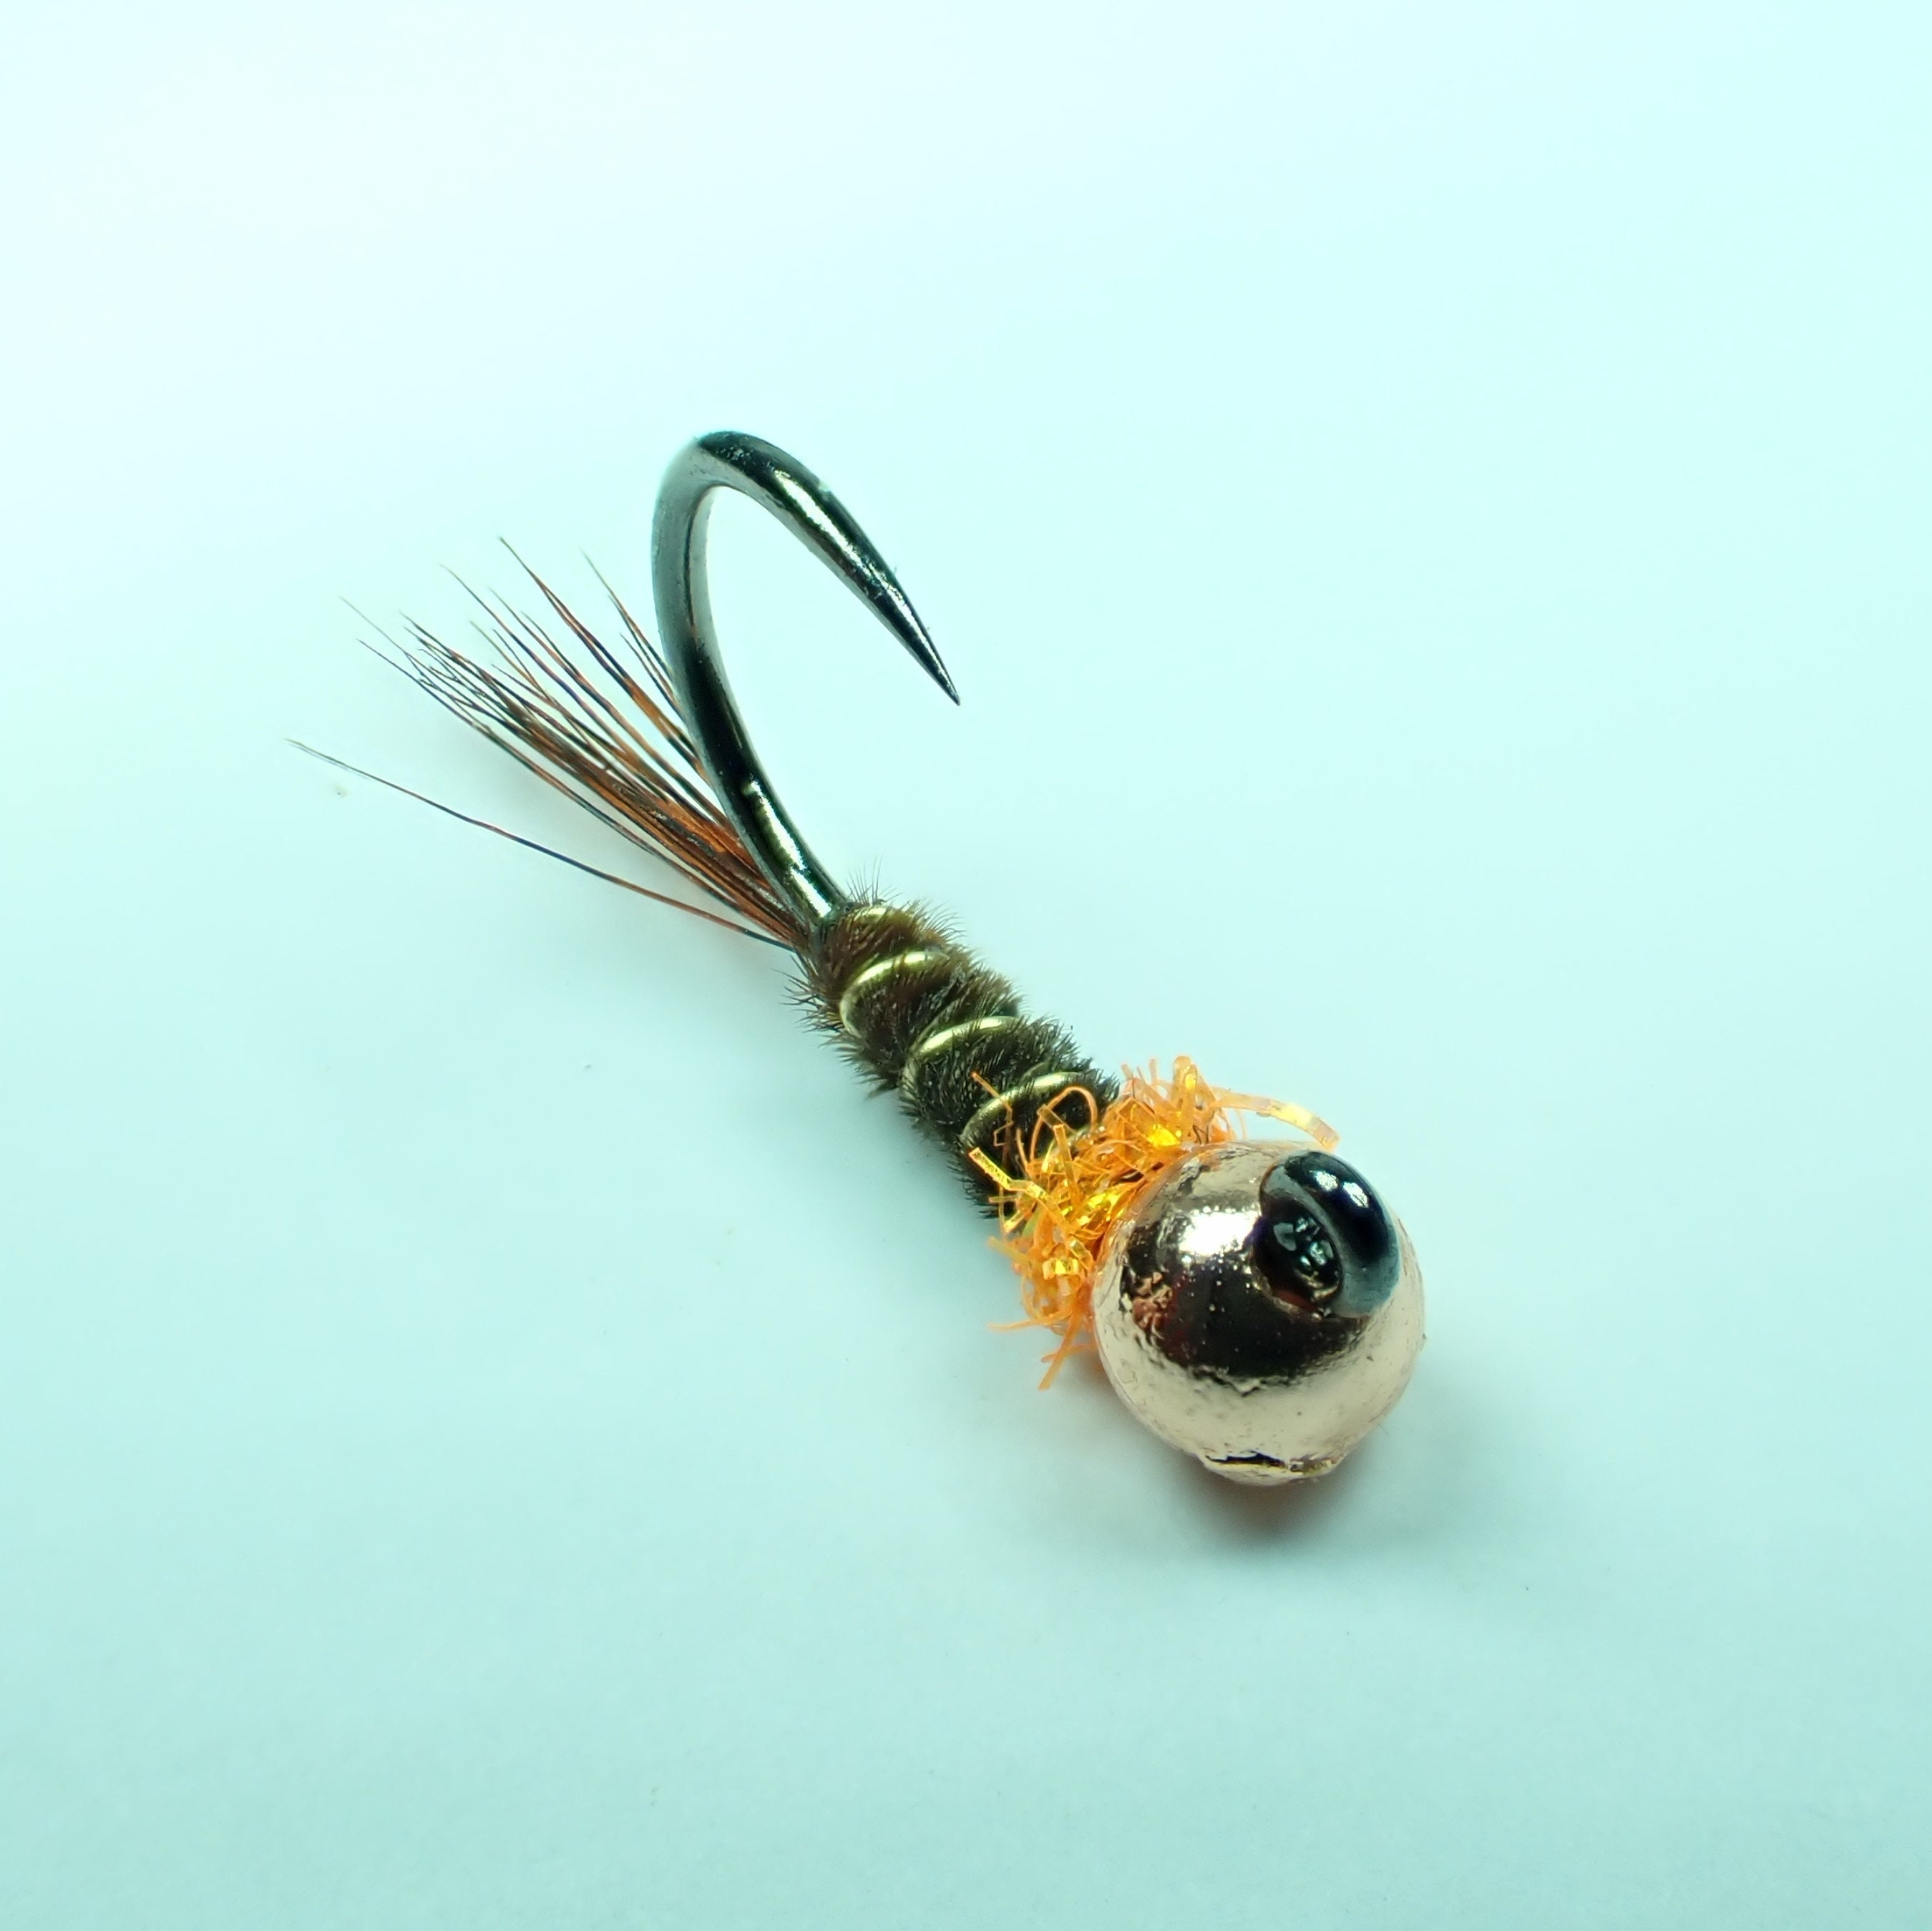 Buy Copper and Orange Frenchie. Barbless Jig Nymph Fishing Fly